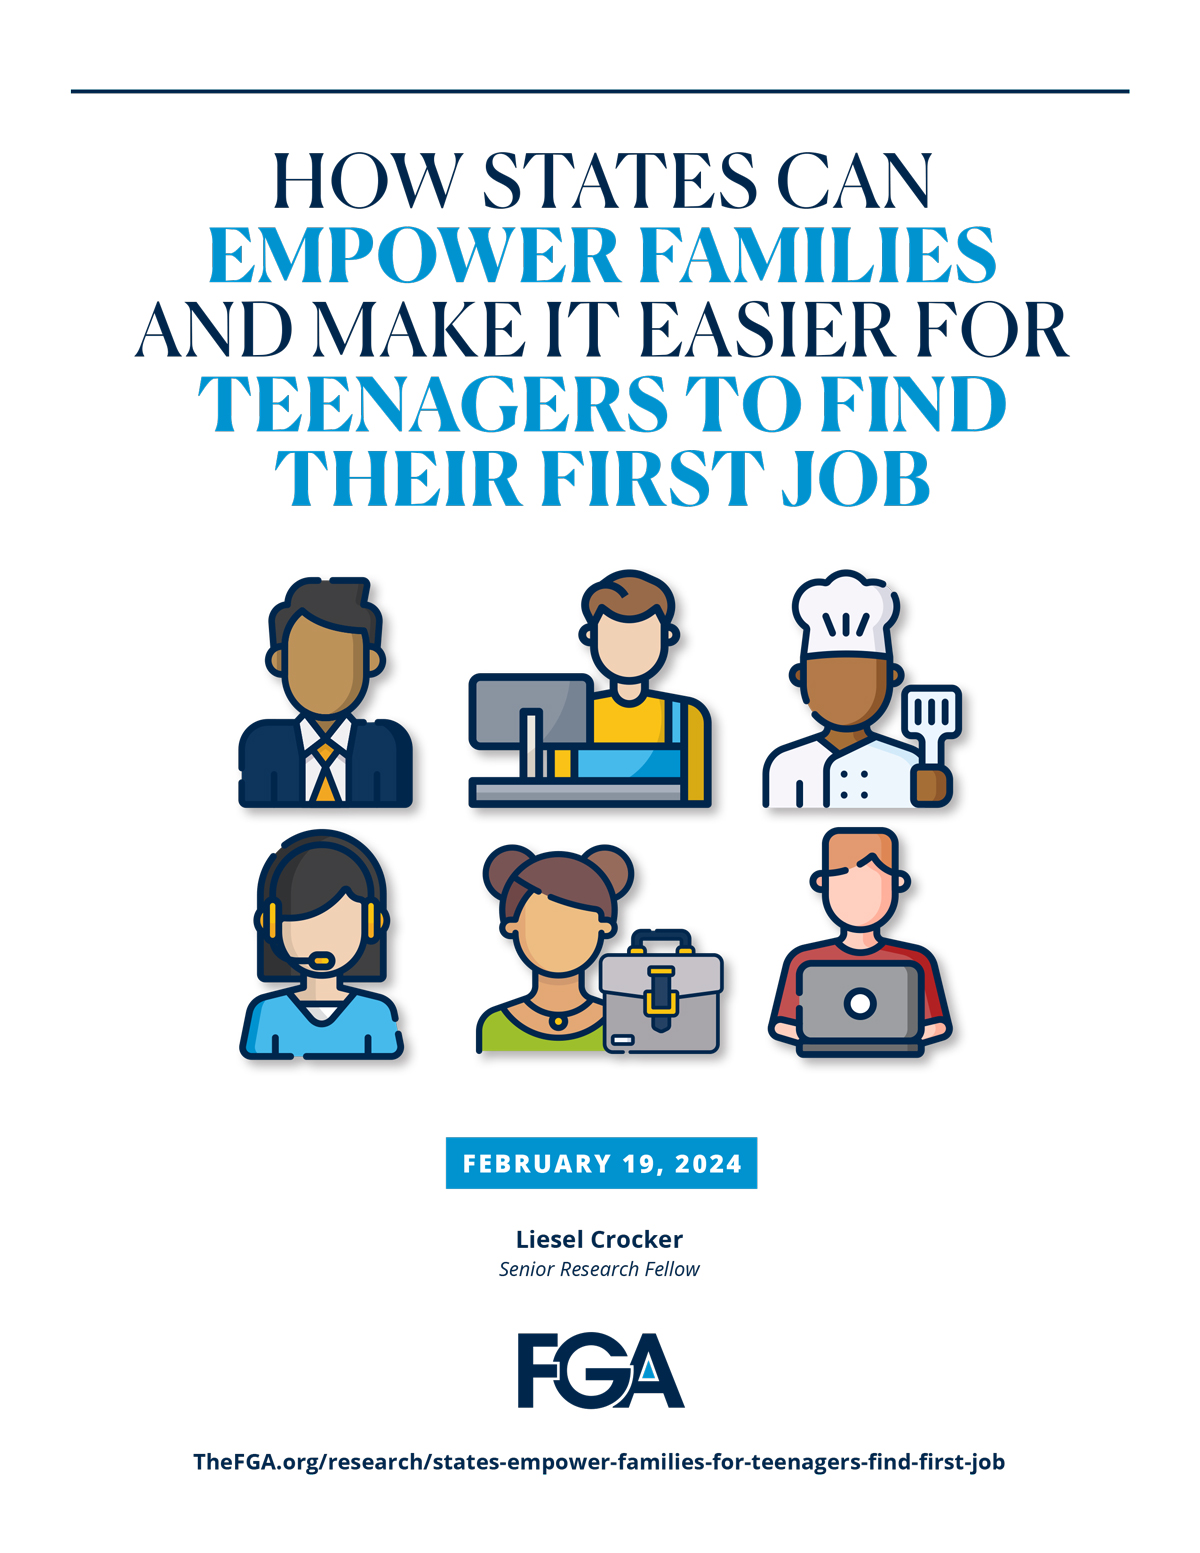 How States Can Empower Families and Make It Easier for Teenagers to Find Their First Job 